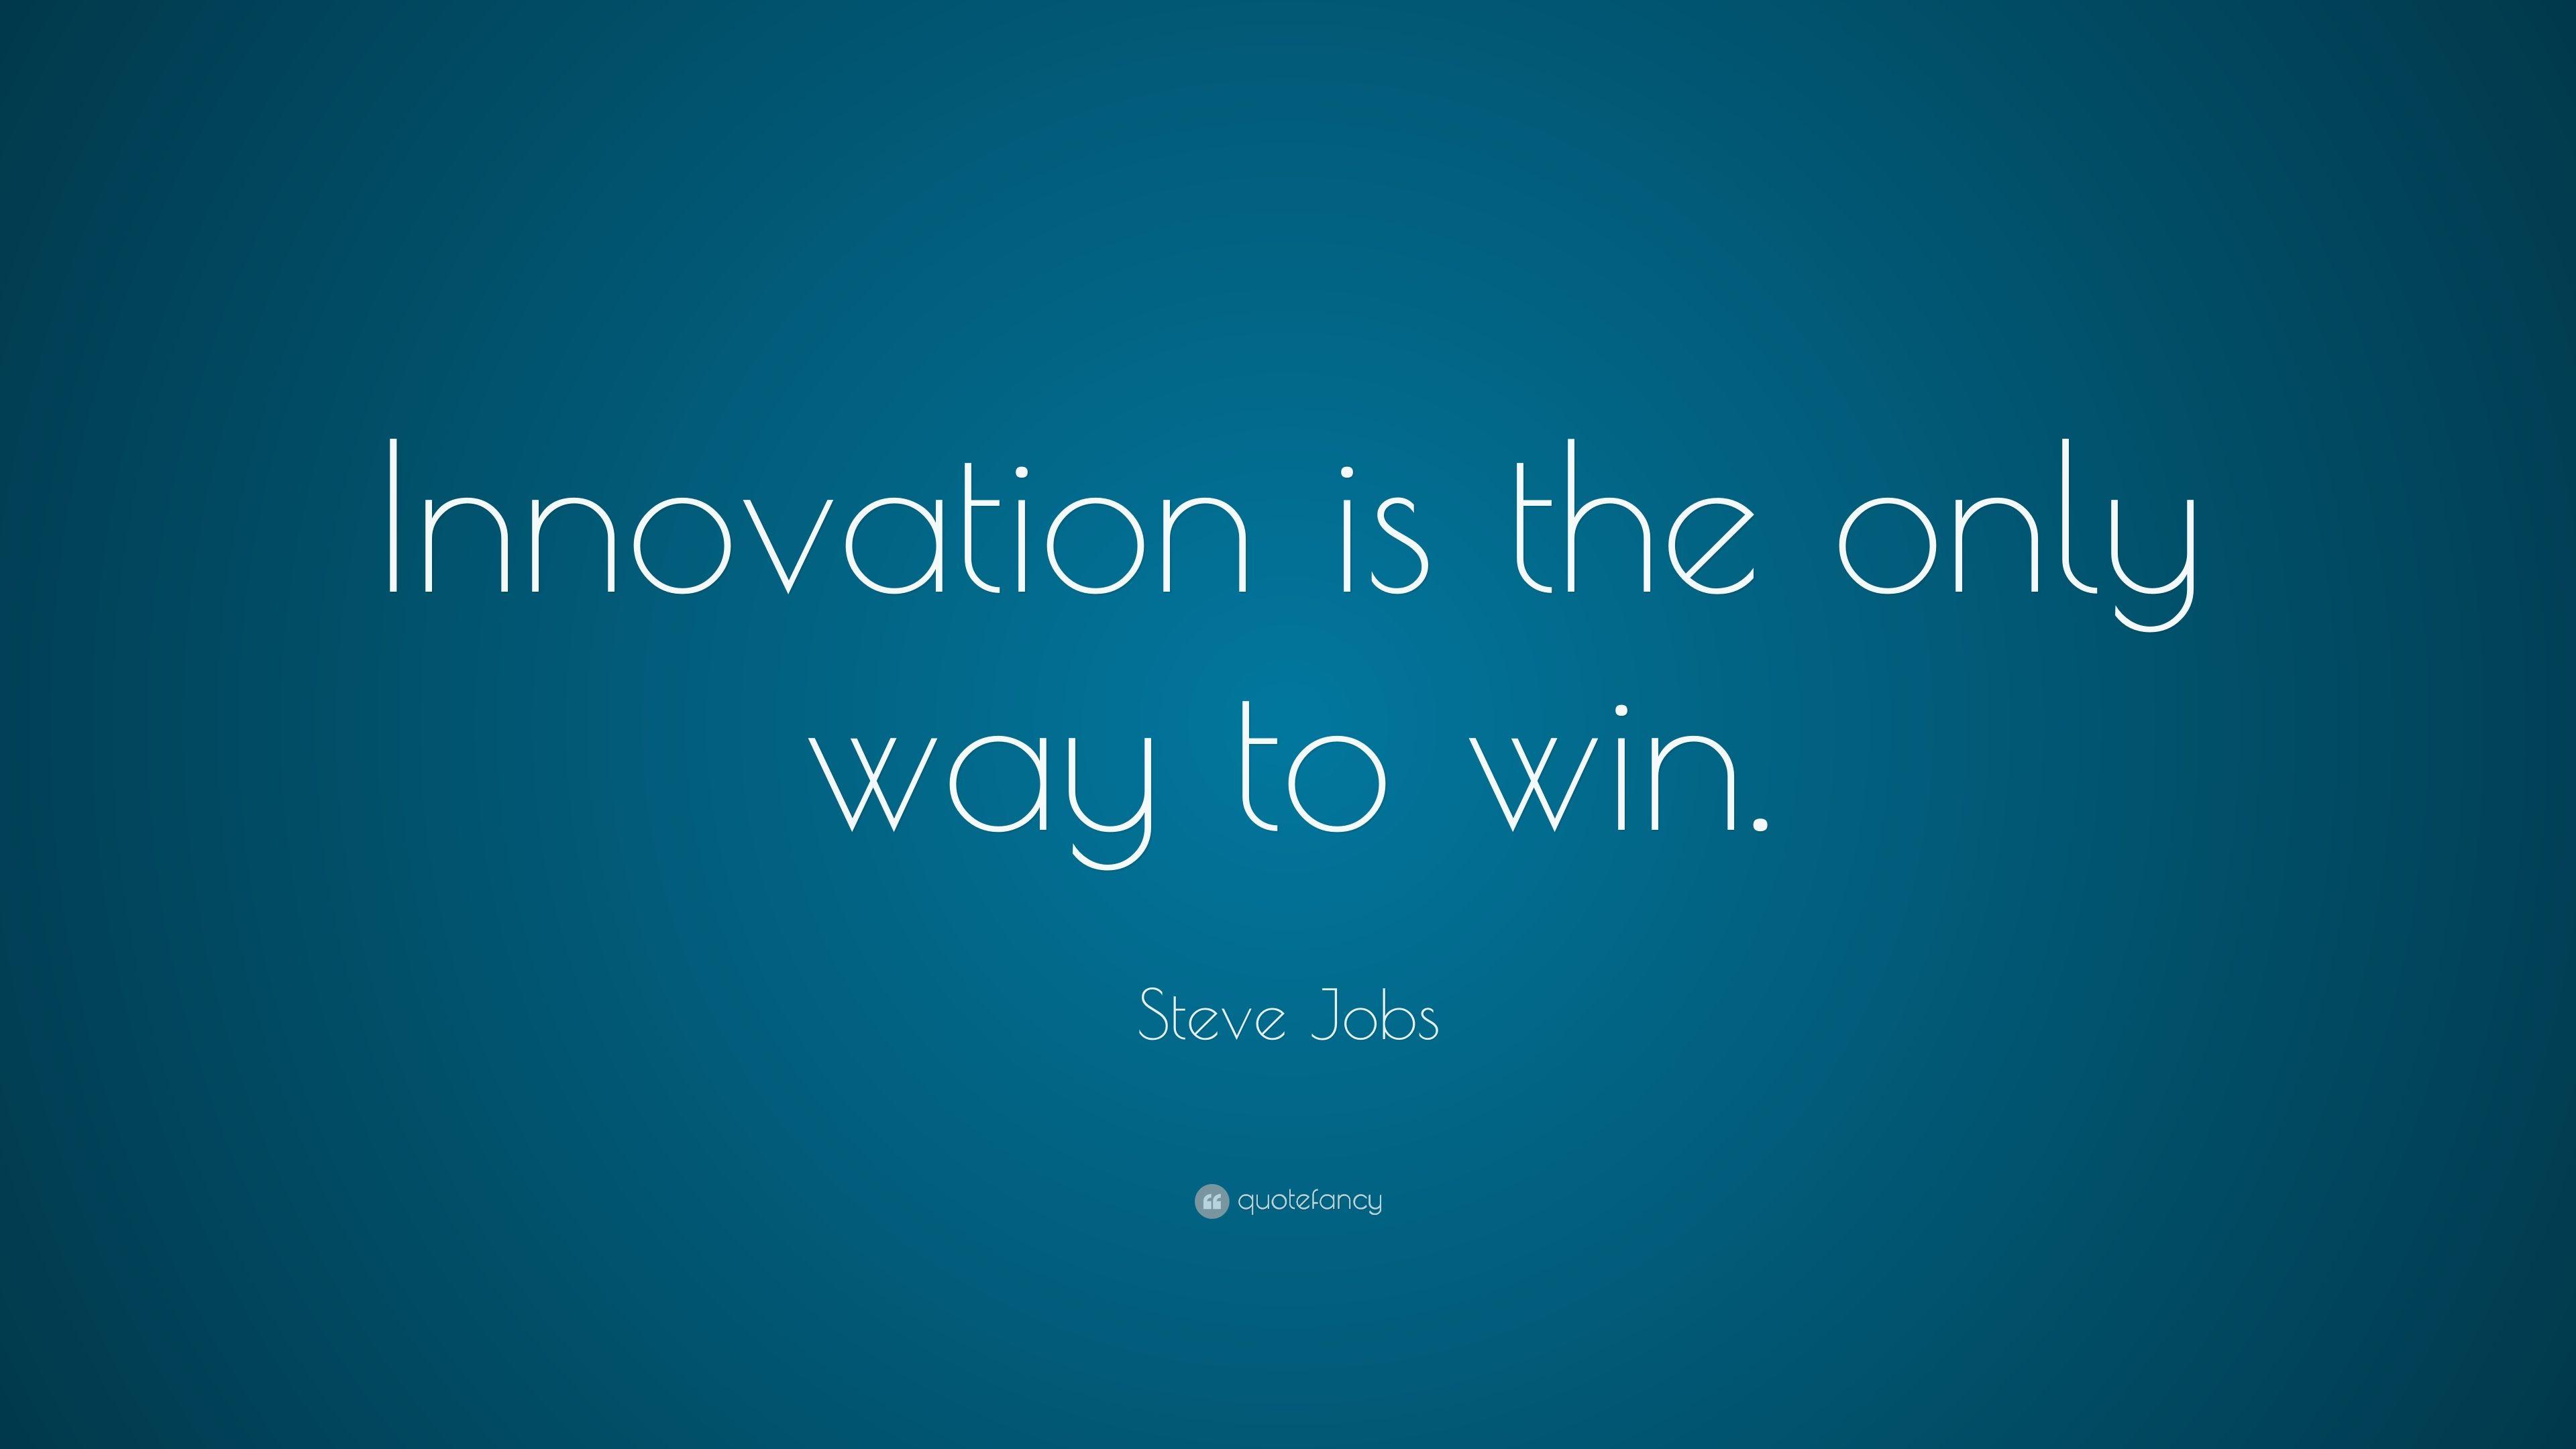 Steve Jobs Quote: “Innovation is the only way to win.” 23